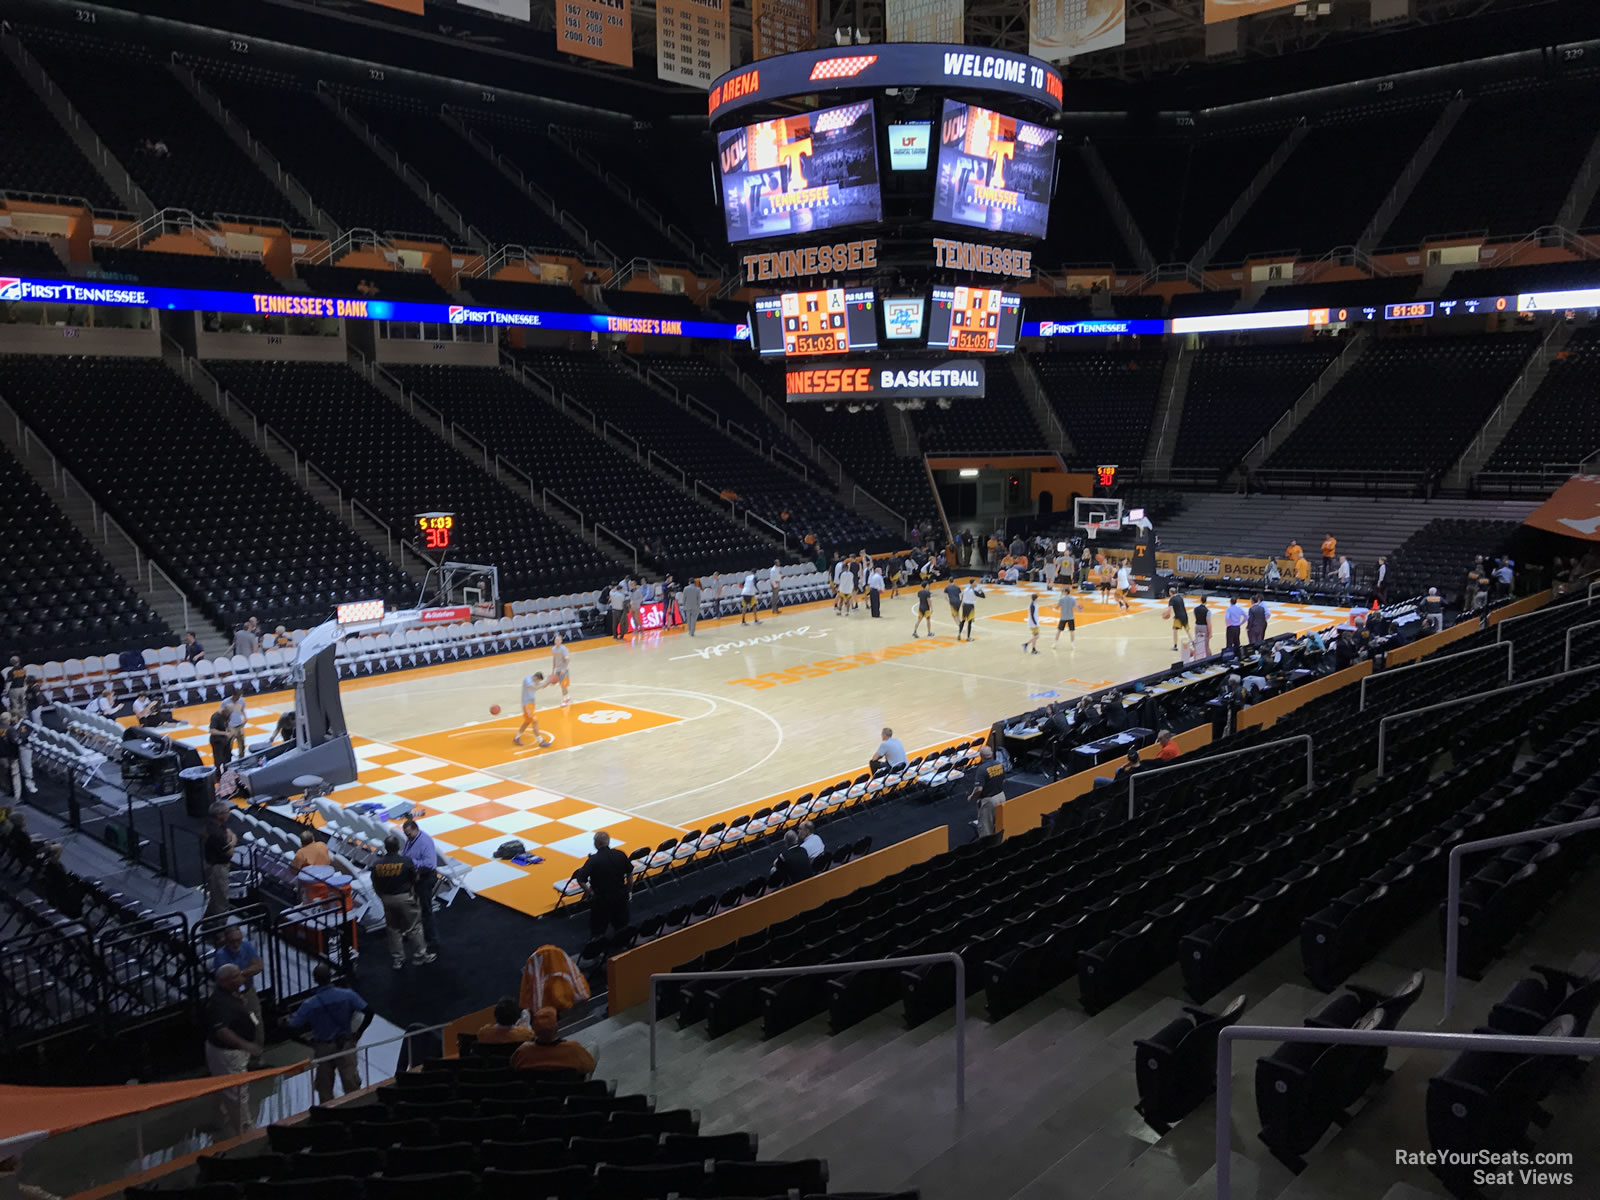 section 109, row 17 seat view  - thompson-boling arena